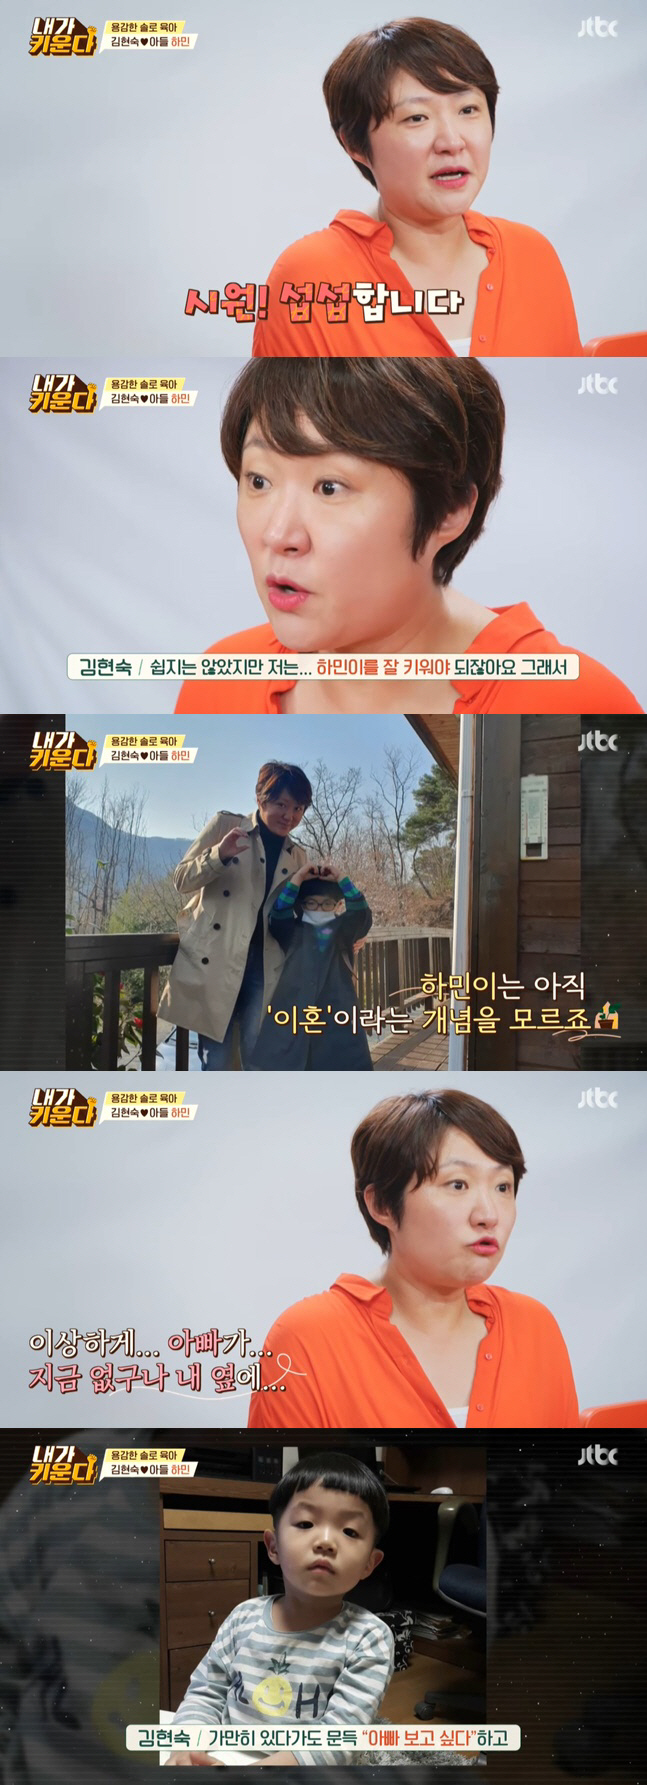 I raise Jo Yoon-hee, Kim Hyun-Sook, Kim Na-young revealed their daily life of raising alone.On the 16th, JTBC Brave Solo Childcare - I Raise, Jo Yoon-hee, Roars family playground visiter and Kim Hyun-Sook and Son Hamins Secret Sunshine life were revealed.On the day Jo Yoon-hee washed Roar and tied his head as soon as he got up, when Jo Yoon-hee caught the eye by completely grooming his curly hair, daughter Roar.Jo Yoon-hee, who went to the playground, was not surprised by the appearance of Roar falling from the swing, but calmly responded to the members great admiration.Jo Yoon-hee calmly responded, saying, Five-year-old Roar, we are brave so that Roar does not panic.Roar showed off the King of the End of The Electric Affinities at the playground.Roar melted the hearts of the cast once again in the form of Friend, the first time he met at the playground, and The Electric Affinities end king, who spoke to his sisters without hesitation.Jo Yoon-hee said: Roar is unrestrained, active in talking to Friends, so many times Ive been in trouble, I like people and I go straight.I get close to the people I first saw. I am a really bright and cheerful child. Jo Yoon-hee said Roar is the opposite of passive self and said: I envy Roar so much.I tell any friend to go and play first and say my opinion without hesitation. I am always honest with my emotional expression. I do what I want to do. Kim Gurado was surprised by Roars The Electric Affinities, saying, I will borrow a big space later when I have a birthday party.Chae Rim looked at the efforts of Jo Yoon-hee, who worked hard to brighten Roar, saying, Roar is bright and actively grown up.But there was also difficulty for mum Jo Yoon-hee, which is the eating habit of daughter Roar, who is usually less interested in food.Jo Yoon-hee challenged Roar to save his appetite with a dish using squid to regain Roars appetite, but Roar did not try to eat it easily.Nevertheless, Jo Yoon-hee tried to get Roar to eat squid until the end, and with the efforts of Jo Yoon-hee, Roar eventually ate squid deliciously.At this time, Jo Yoon-hees sister appeared; Jo Yoon-hees sister is an English language school counselor and lives together with Jo Yoon-hees proposal.Jo Yoon-hee said, When Roar has an emergency, I need someone to solve the situation together, and I was worried that I would be embarrassed by myself.My sister said she could help me, so I wanted to live with her. I am getting too much help from her. My sister played with Roar and had a drink with Jo Yoon-hee, helping Jo Yoon-hee like a husband.Kim Hyun-Sook first unveiled Secret Sunshines life with 7-year-old son Hamin.Kim Hyun-Sook, a seven-month solo child care worker, asked how he felt as a soloist.If everyone has a child, it is not easy to make that decision, he said. But I had to grow up well, so I did not have time to lament.I heard a lot of ideas about how to raise Son well, he replied honestly. Son does not know the concept of divorce yet.But I know Father isnt there for me now. I just say, I miss him. And I feel sore.Im trying to overcome it, though its difficult for me, he said.Kim Hyun-Sook was living with three generations from Secret Sunshine to son Hamin and his parents.The magnificent Secret Sunshine house was envious of a nature-friendly space that ran from a spacious yard to a garden.Kim Hyun-Sook also admired the breakfast table with miso and grown vegetables dipped in person.Kim Na-young shouted I envy and said, Please find a house in Secret Sunshine.Kim Hyun-Sooks son Hamins daily life, which showed off the same activeness as the Energy, was also revealed. Hamins hobby is to pick vegetables in the garden, and his specialty is to eat miso and stay at home.It has emerged as a new dark horse of the childrens food system, which eats pork belly on miso soup and rolls rice in miso soup.Kim Hyun-Sooks confession about raising a child alone also followed.Kim Hyun-Sook, whose mother remarried and Father was not her biological father, said, When Father made a difficult decision, Father first said, Do not worry about your decision.Well be the support. And first he offered to come into Secret Sunshines house.Thank you so much, he said, showing tears in gratitude, making everyone cry.Kim Na-youngs remaining Haru, who revealed his daily life with two sons of High Tension of the Reversal, was also released in the last broadcast. Kim Na-young took an ad shoot with his children.I wanted to make sure the shooting was going smoothly, but my brother Lee Joon started to cry while he was chatting with his brother.Kim Na-young said, When this situation happens, advertisers and staffs start to notice, I can not get angry, and I get smaller.Kim Na-young, who had returned home since then, began washing her psoriasis, but in the meantime, her brother Lee Joon had a major accident: painting a toy car with crayons.But Kim Na-young said, I am wrong to put Crepas there. He told Lee Joon not to play such a game in the future.Chae Rim said, I really want to cheer on Kim Na-youngs tough Haru, and sympathized with the grievances of solo childcare more than anyone else.